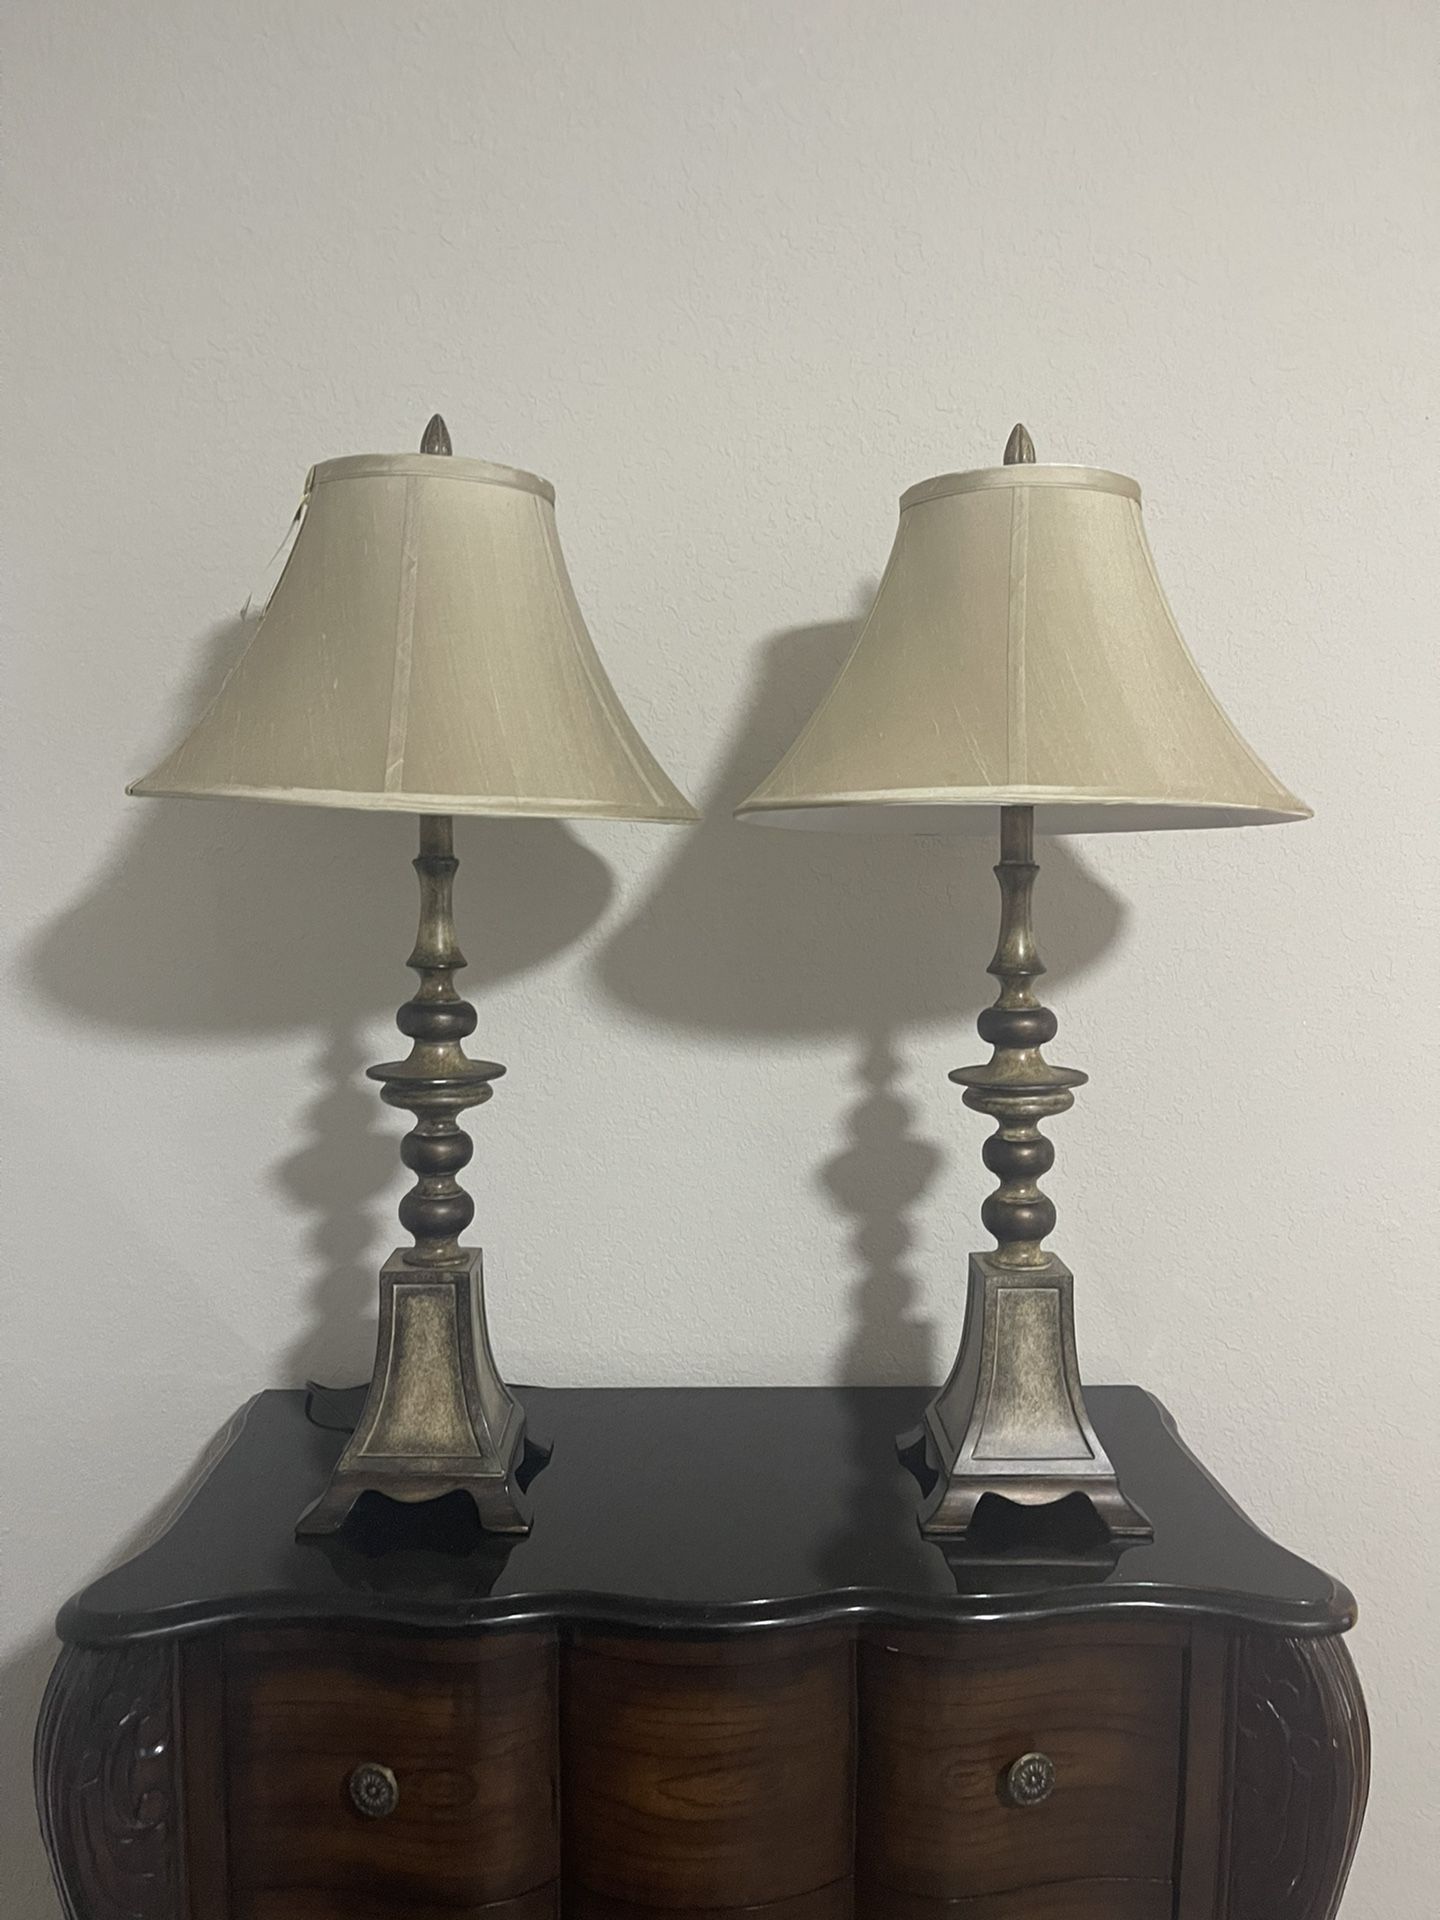 Lamp and Candle Stick Holder